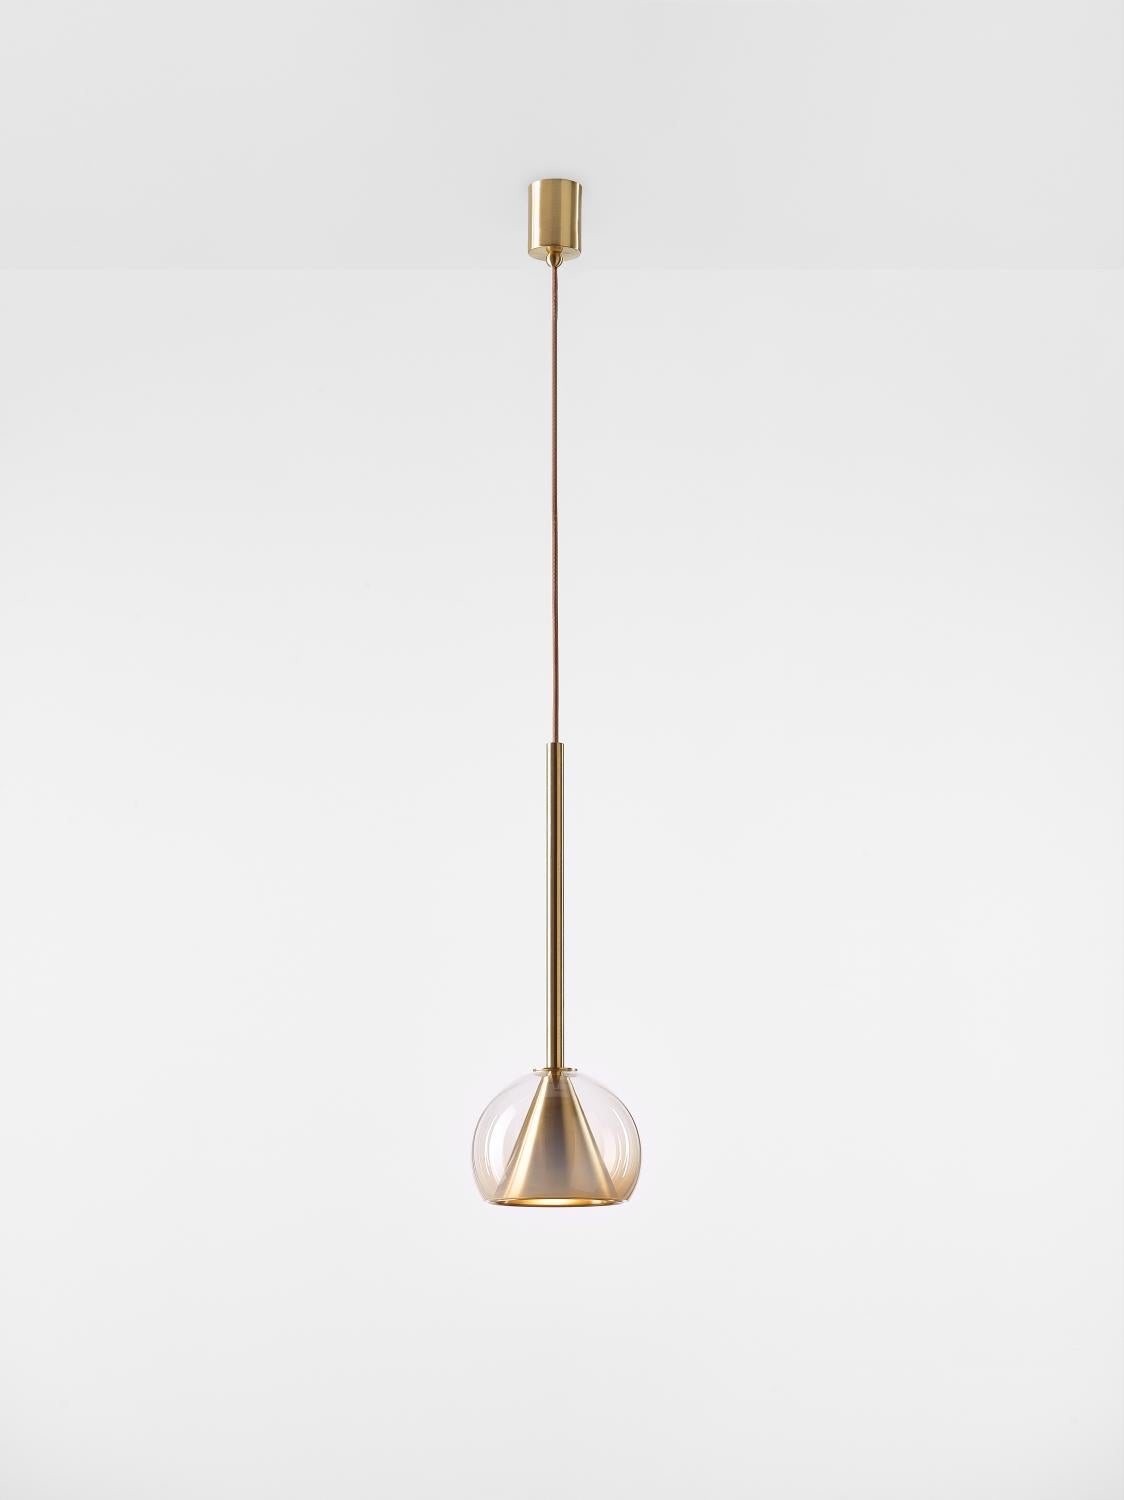 Small Neutral Nude Kono pendant light by Dechem Studio
Dimensions: D 19 x H 52 cm
Materials: brass, glass.
Also available: different finishes and colours available.

This collection of suspended light fixtures combines the elementary geometric